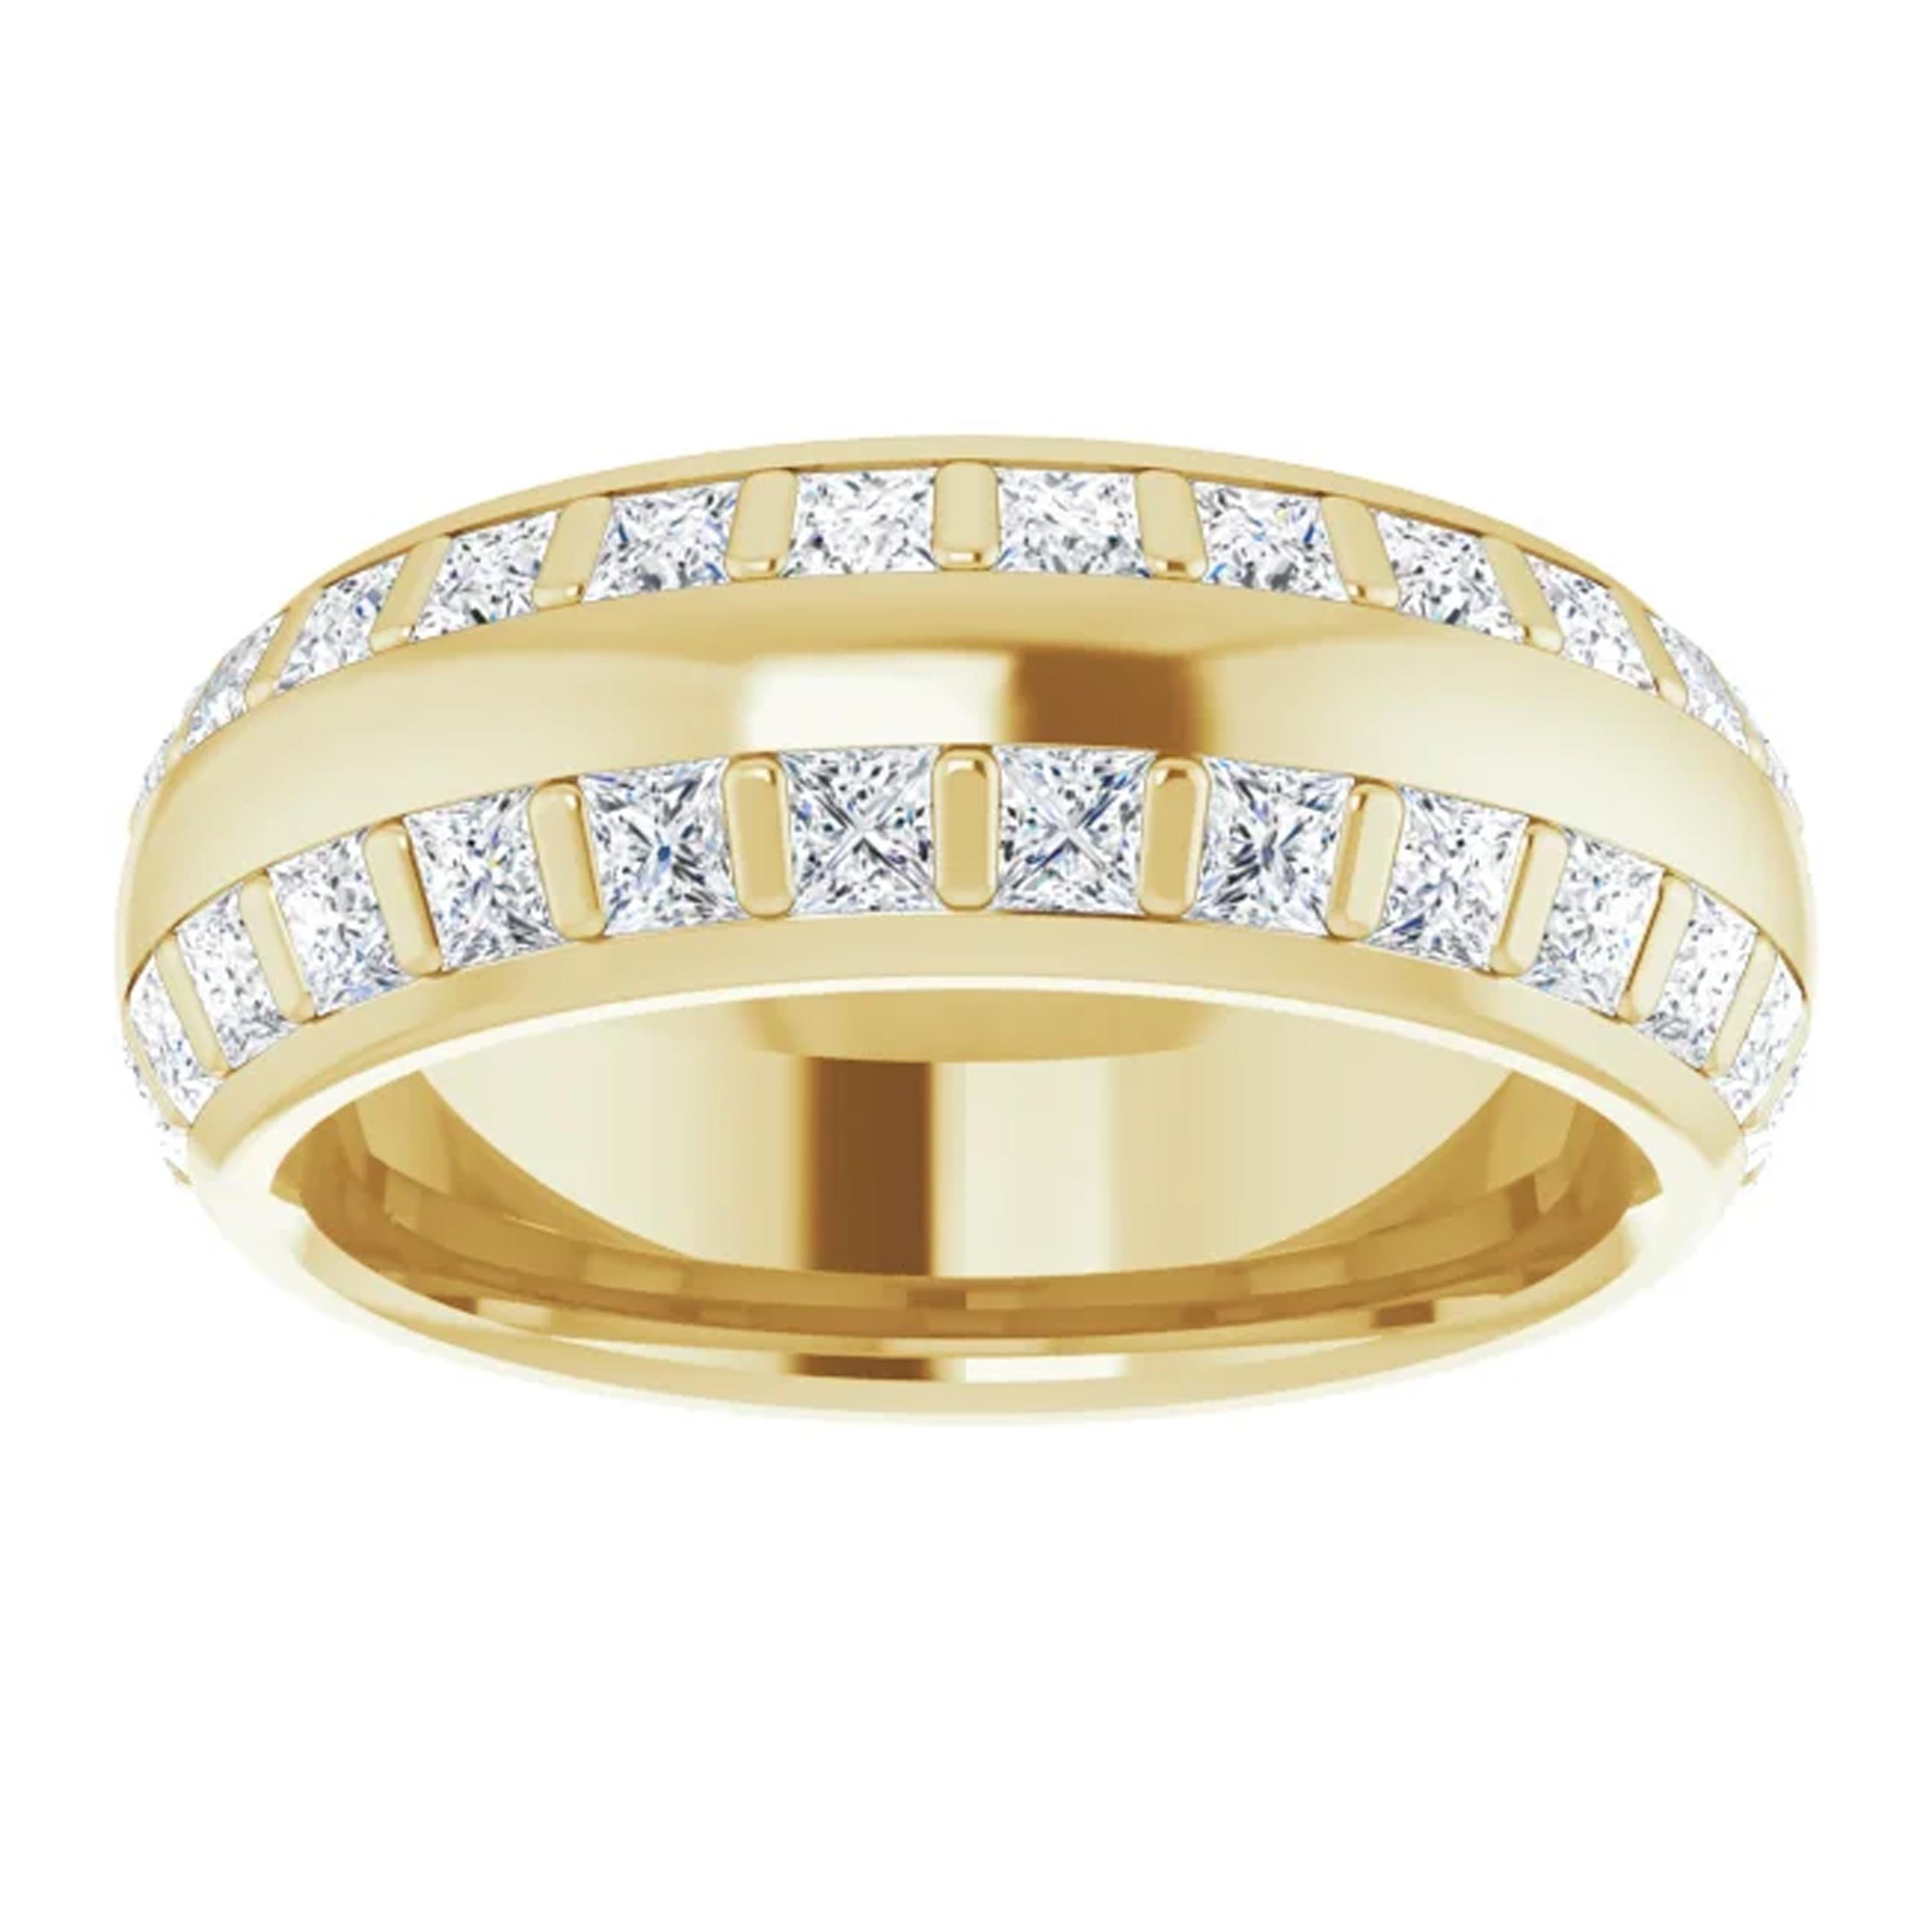 Shimmering princess cut diamond full of fire line the shank of this double row eternity band. Handcrafted in 18k yellow gold, this eternity band is made for finger size 7. This wedding ring may be ordered in other finger sizes as well.

Style